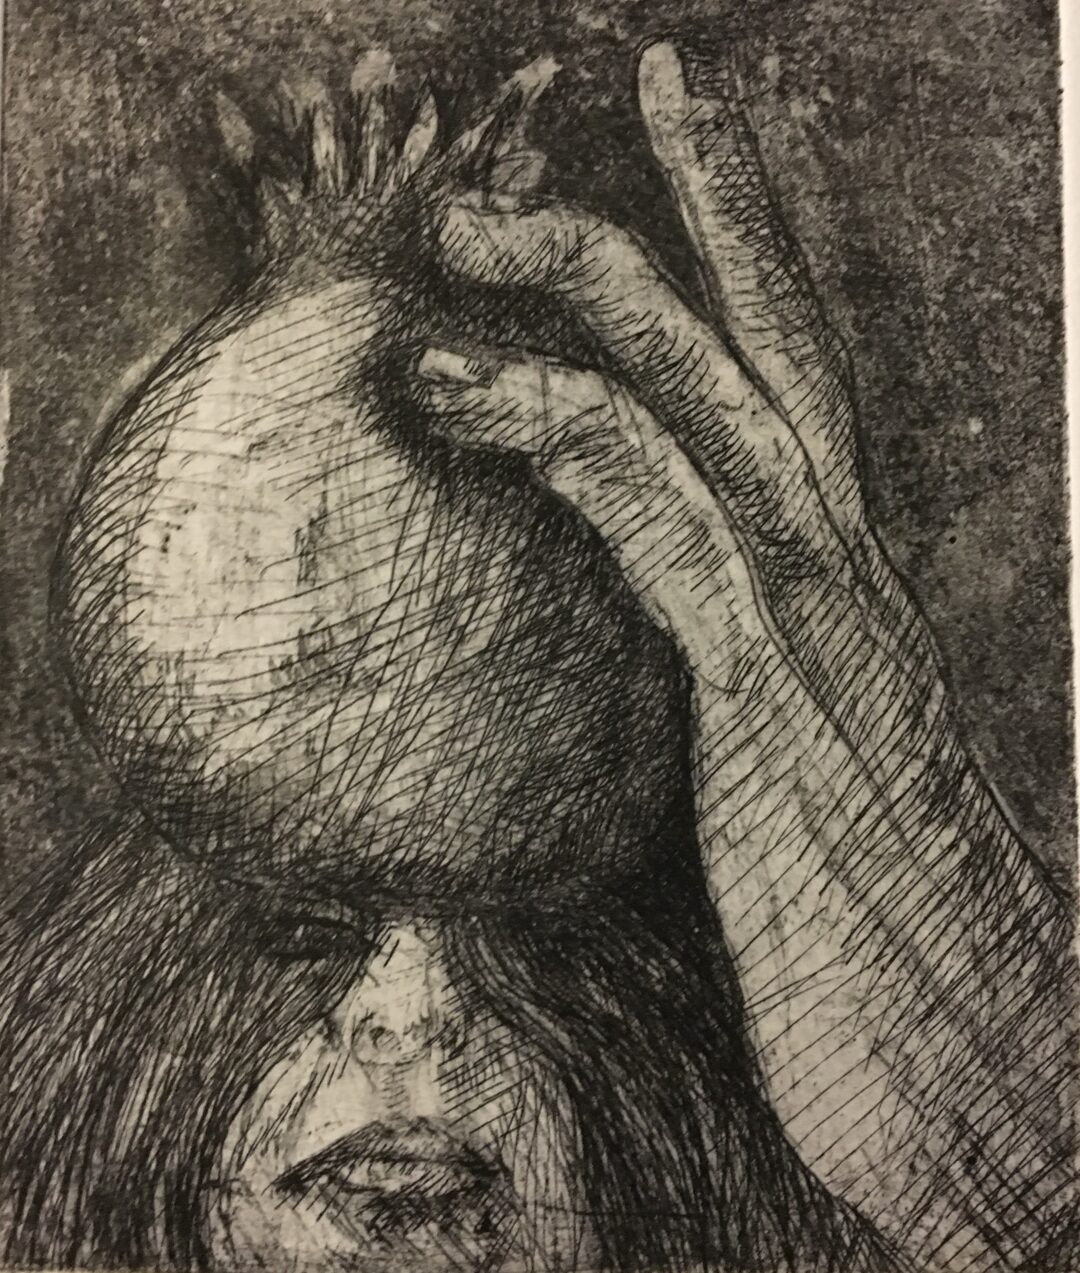 Marcia Shiffman “Woman Holding Pom” etching on Arches paper,  12” x 12” – $200.00